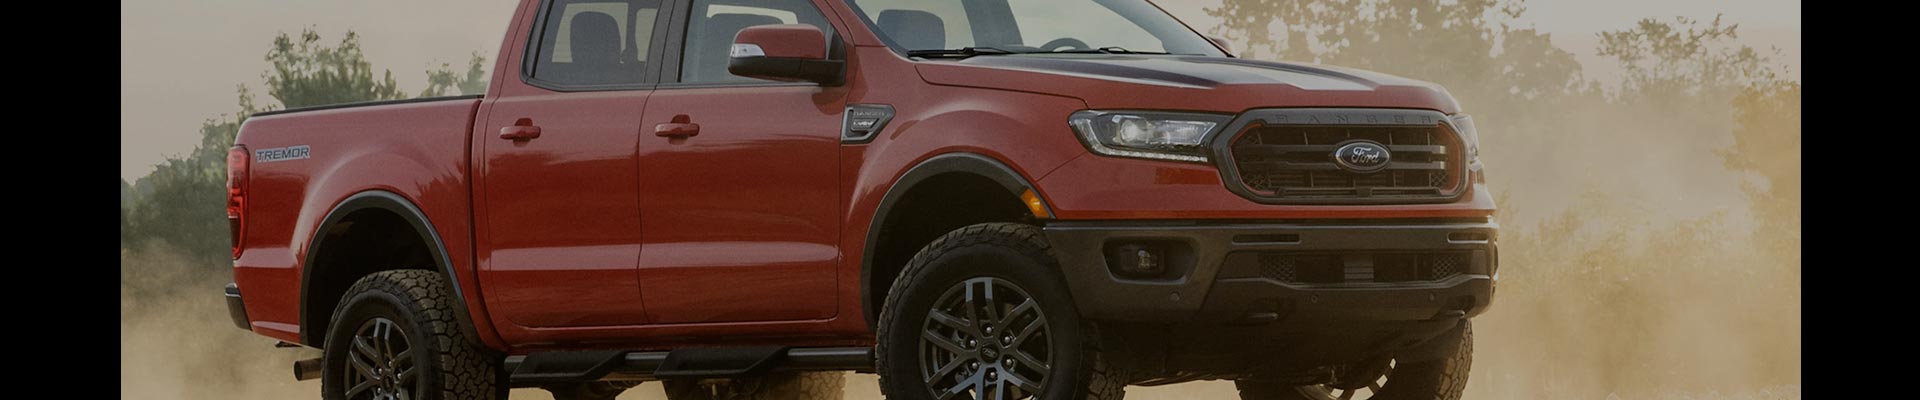 Shop Replacement and OEM 2000 Ford Ranger Parts with Discounted Price on the Net